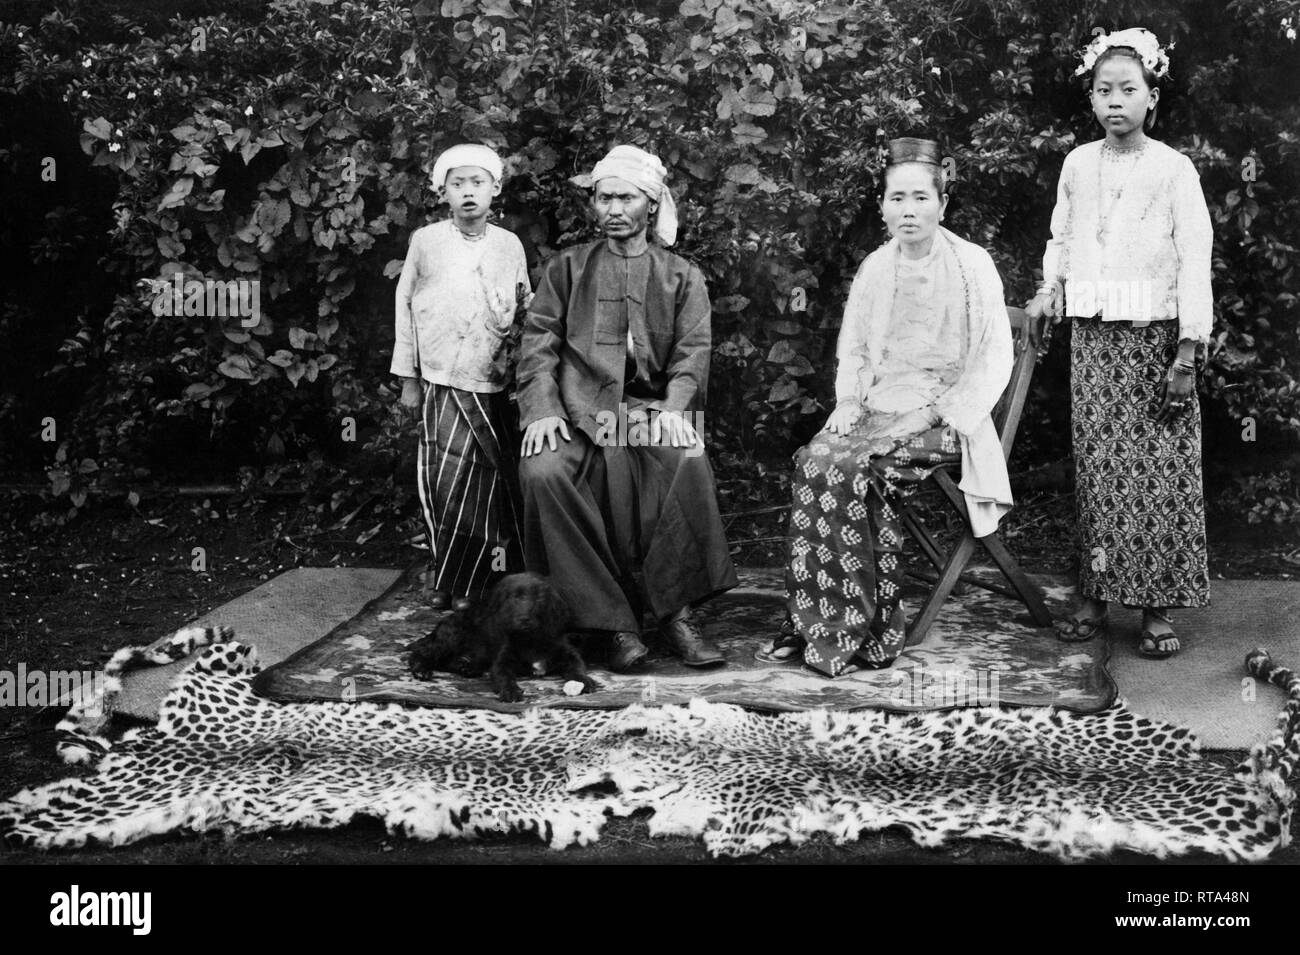 Pek Kong famille, Xi'an, Chine, Asie, 1910-20 Banque D'Images